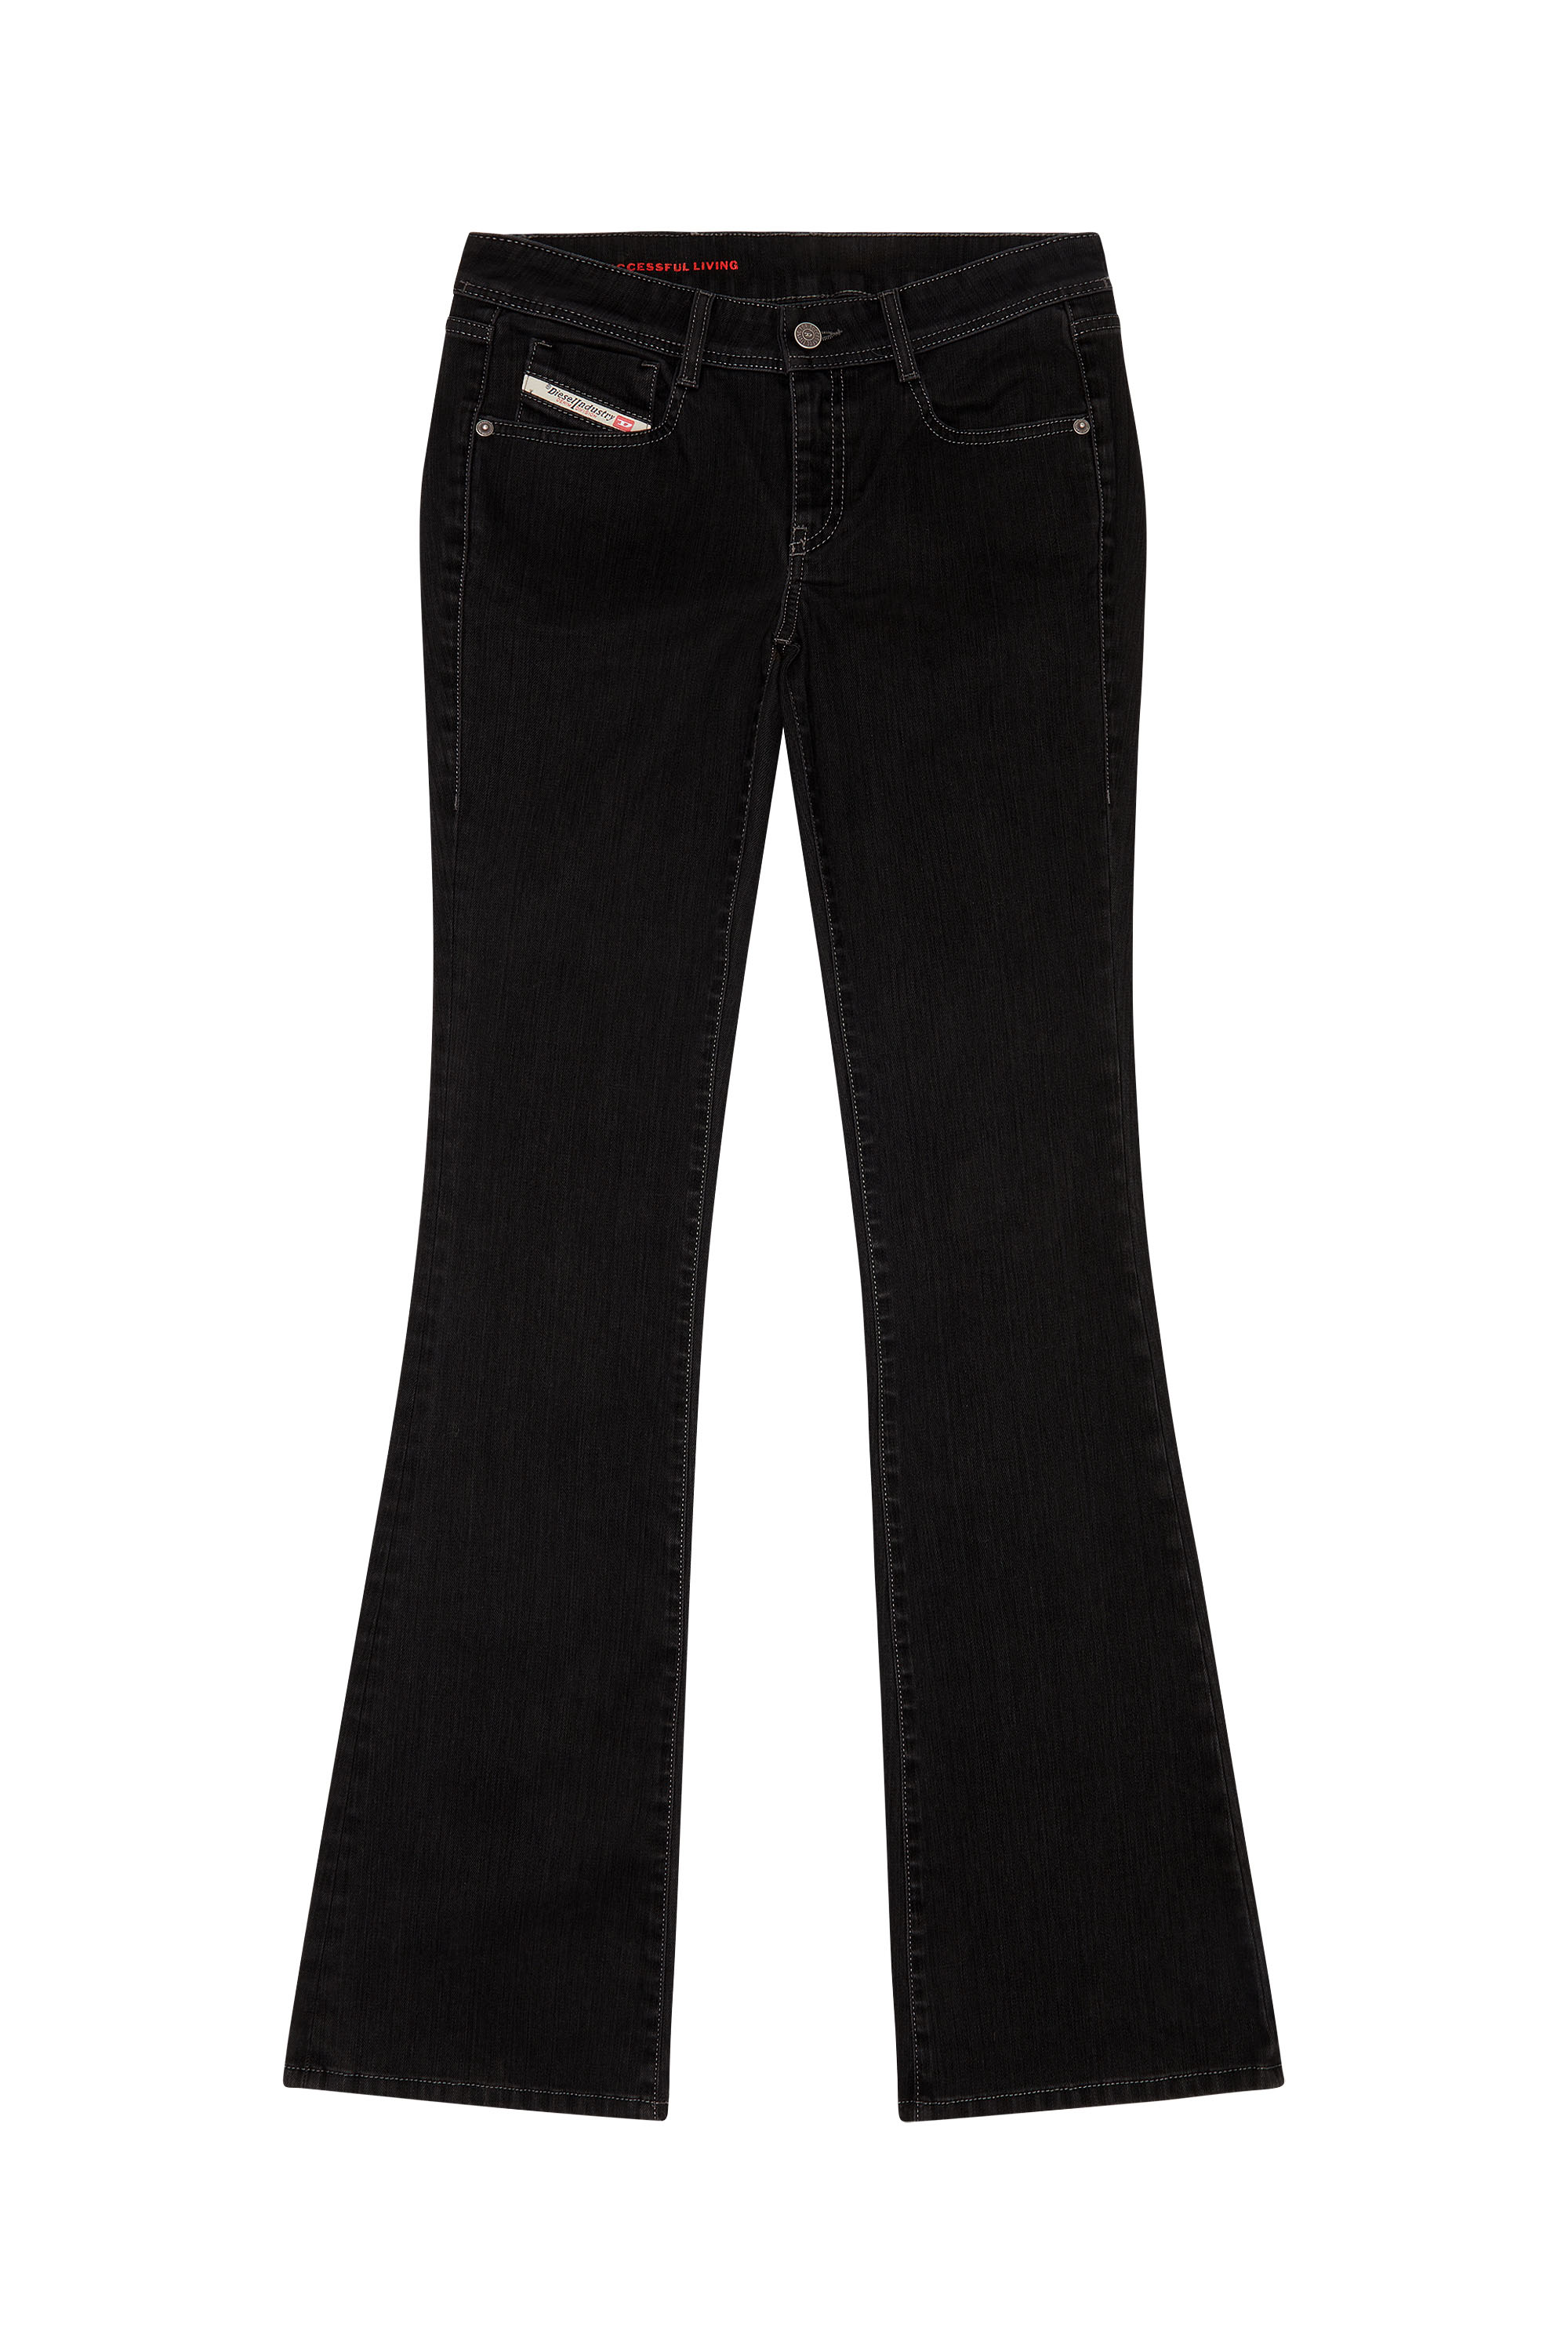 1969 D-EBBEY 0IHAO Bootcut and Flare Jeans, Nero/Grigio scuro - Jeans